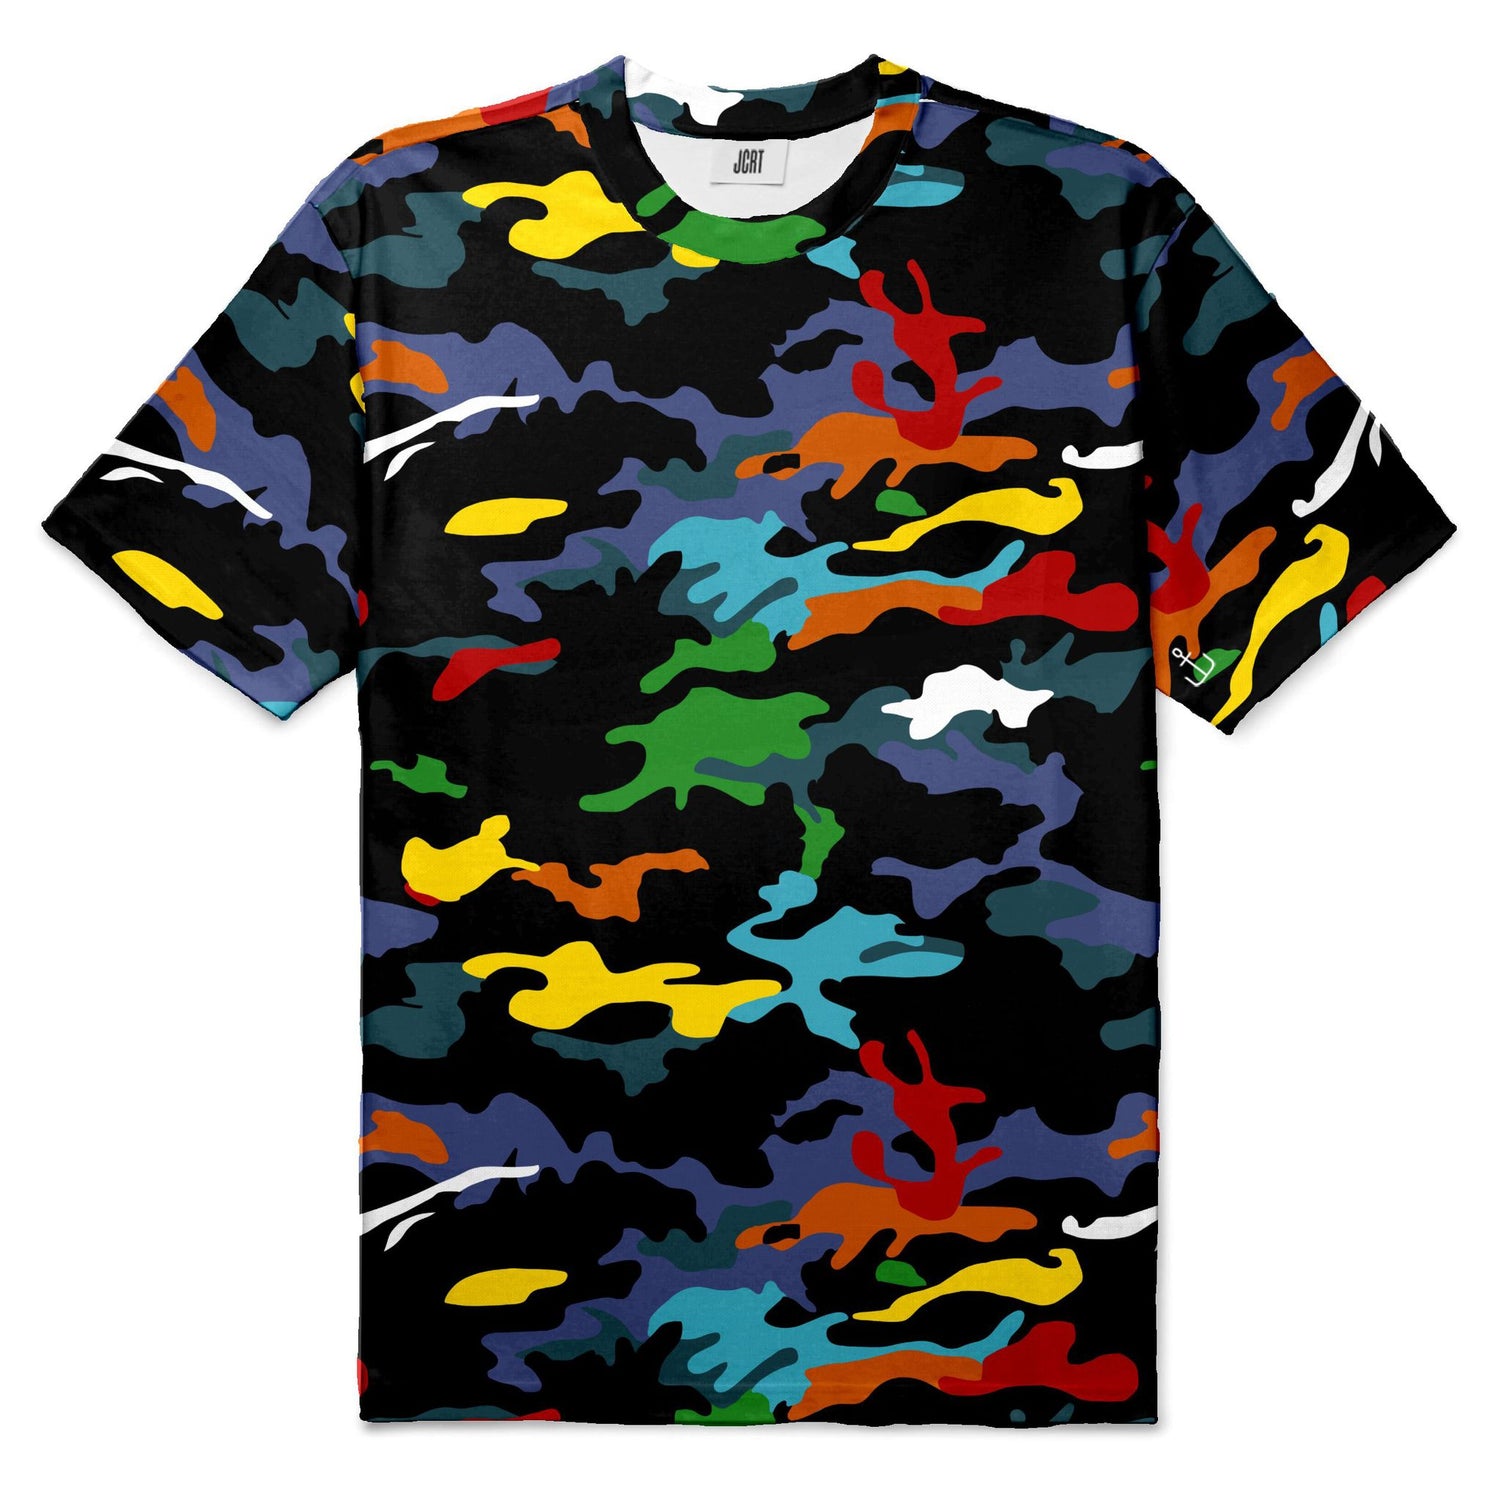 The Modern Nature Camouflage T-Shirt